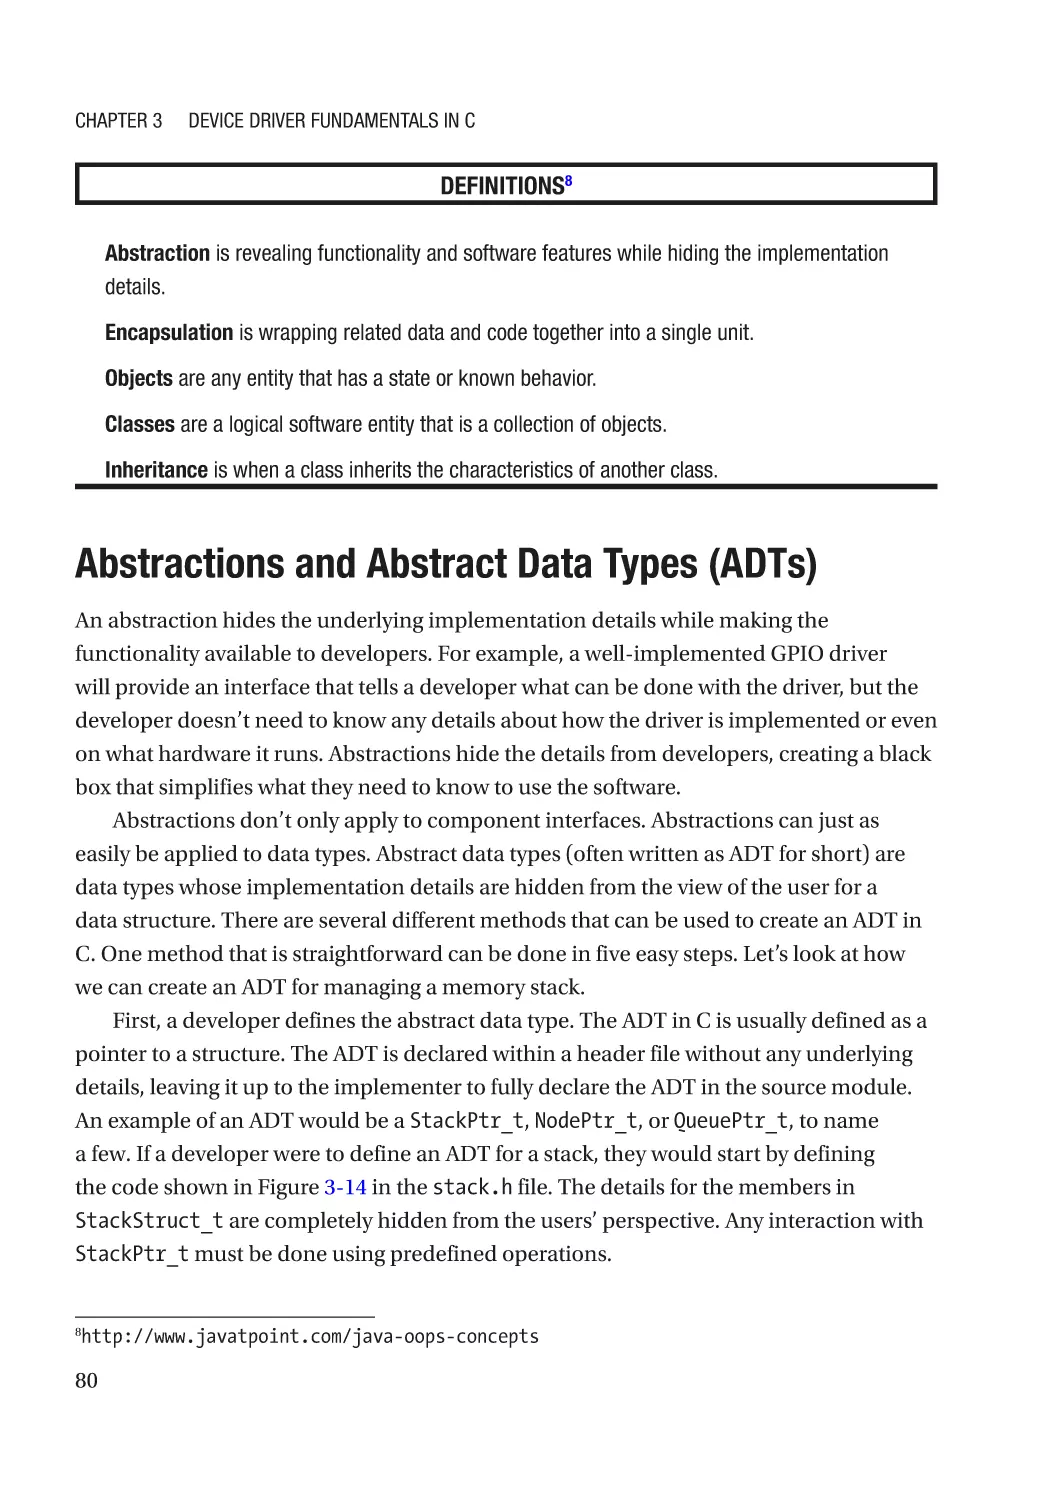 Abstractions and Abstract Data Types (ADTs)